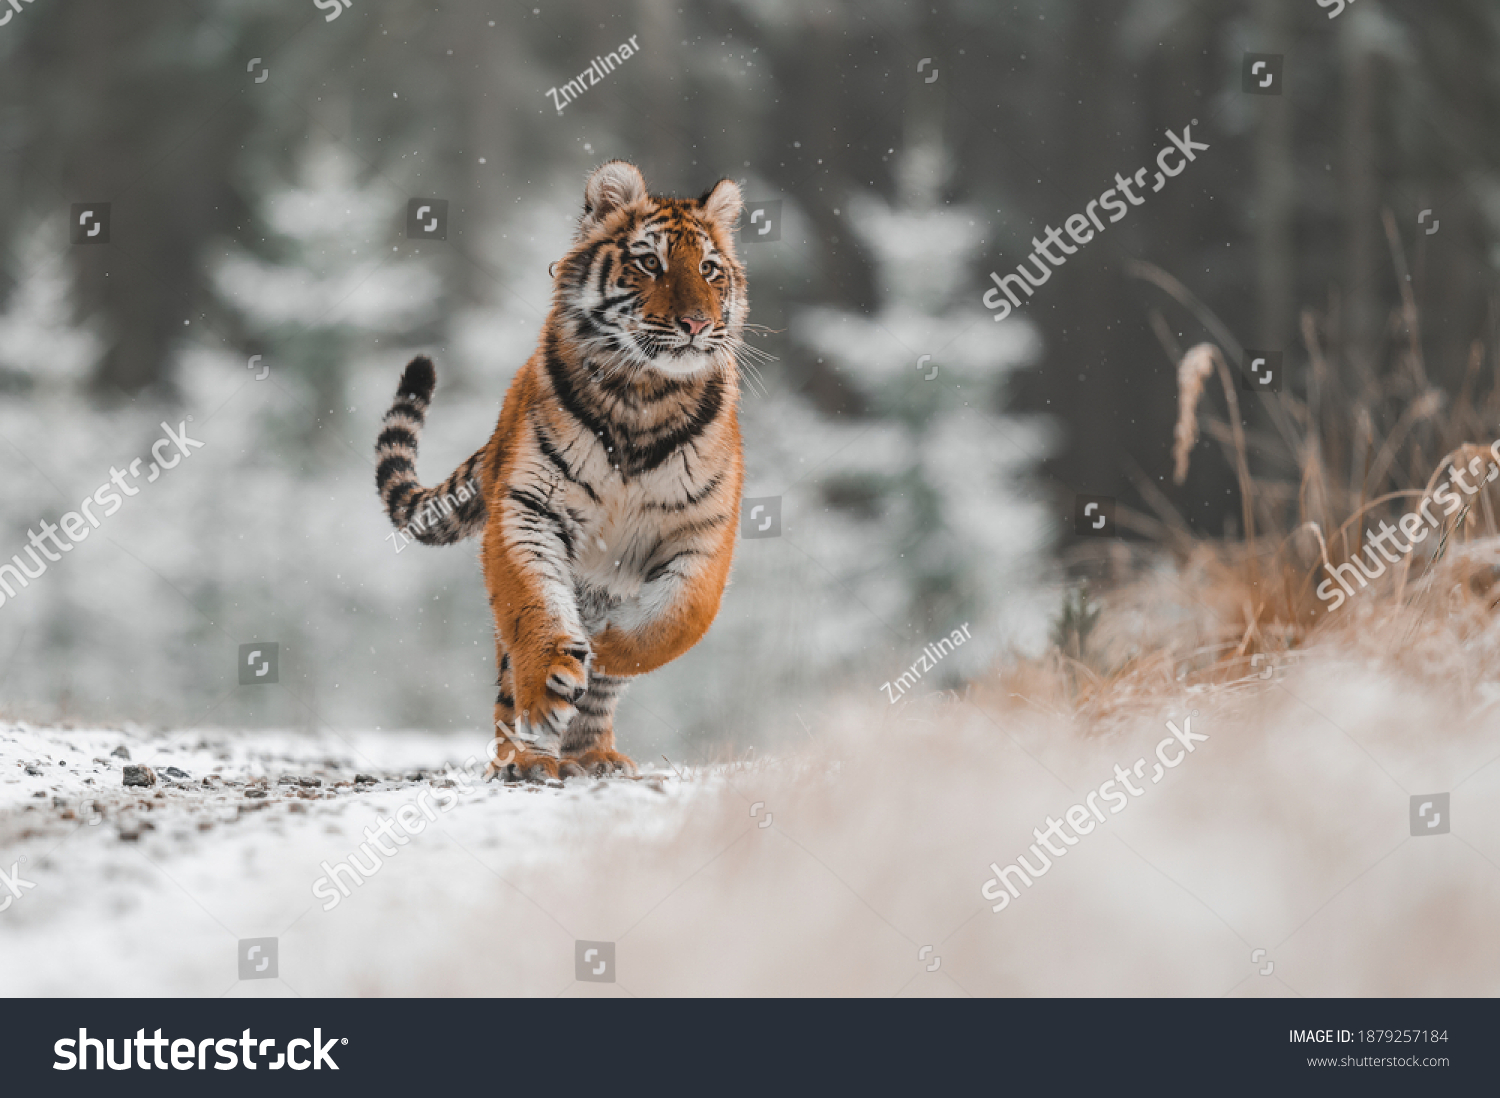 Siberian tiger (female, Panthera tigris altaica) running against the camera. Front view, action shot. A dangerous beast in its natural habitat. In the forest in winter, it is snow and cold. #1879257184